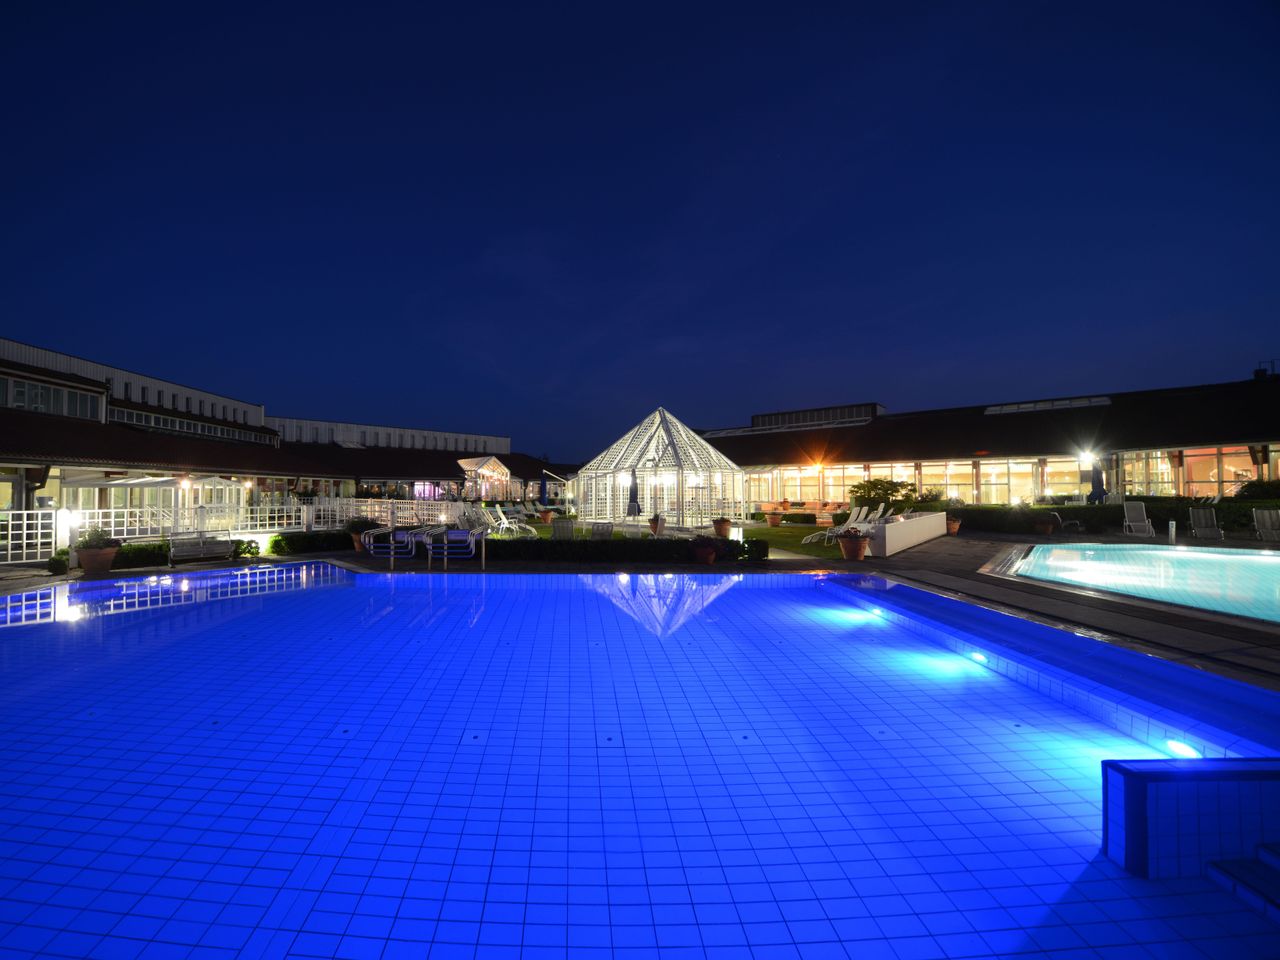 4 Tage Erholung in der Limes Therme mit Halbpension